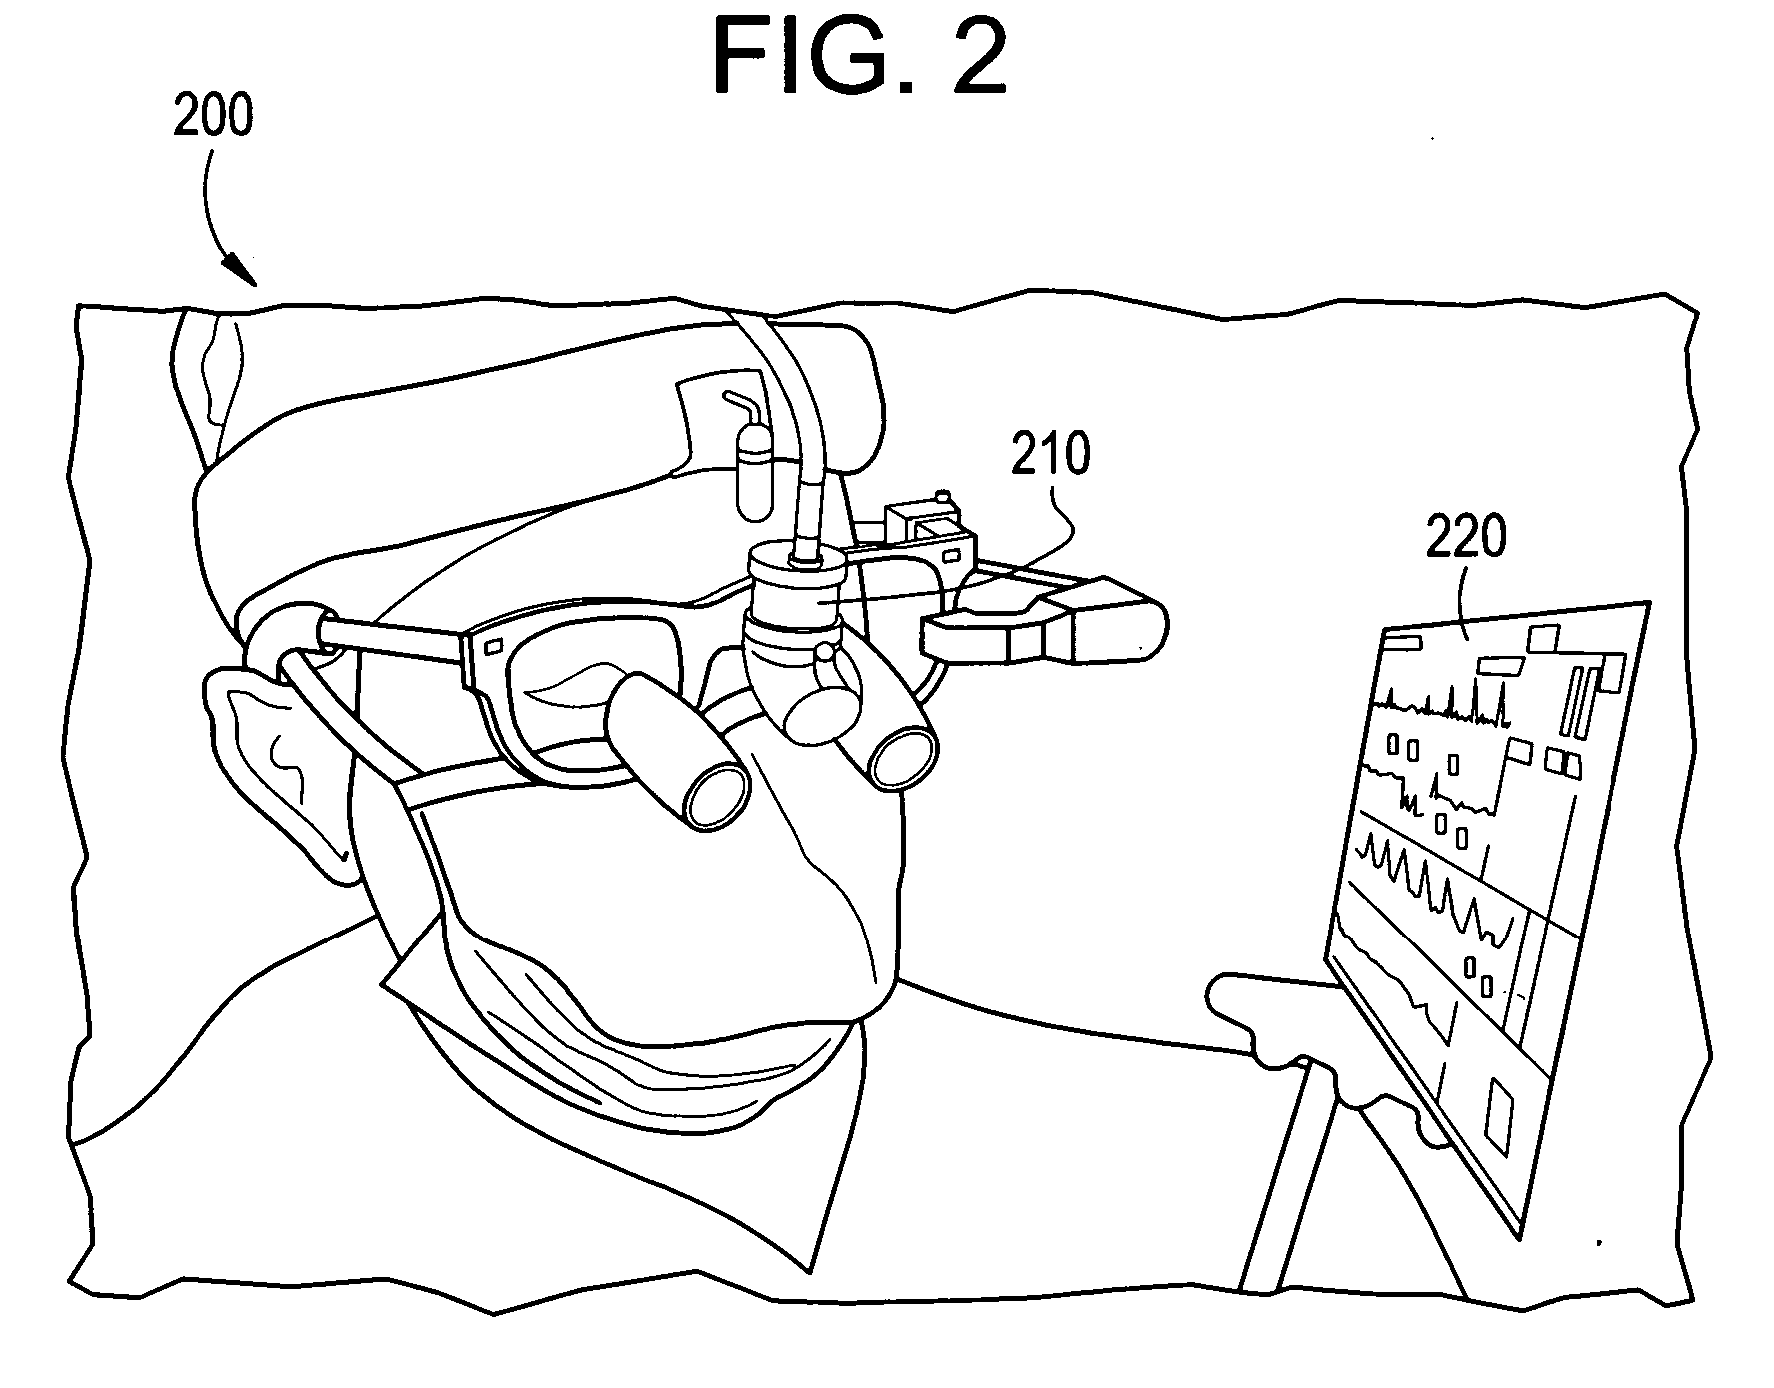 Method and apparatus for surgical operating room information display gaze detection and user prioritization for control